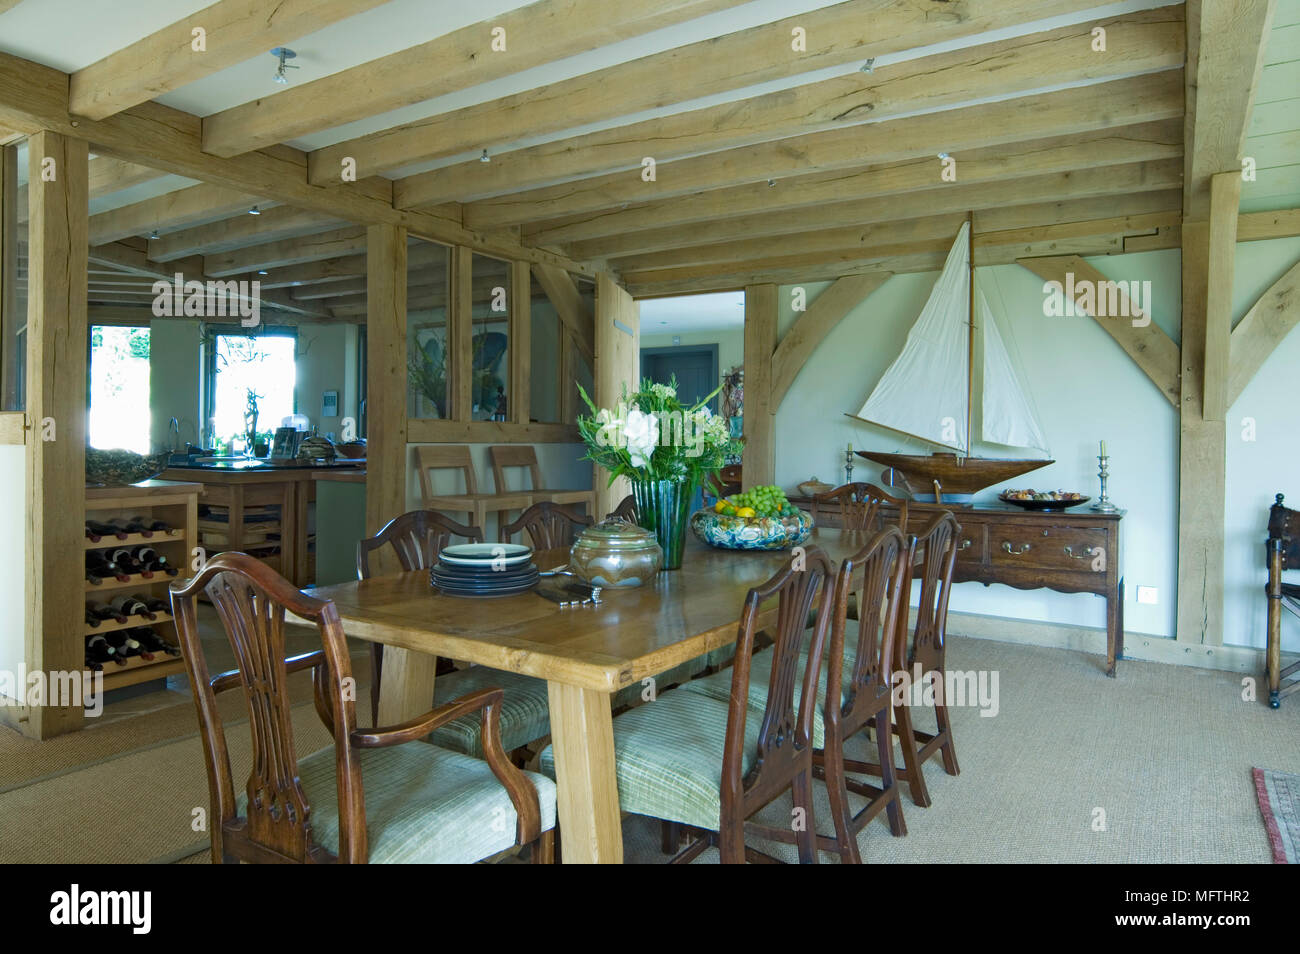 Dining room with wooden table and chairs under exposed wooden beams and model boat in background Stock Photo